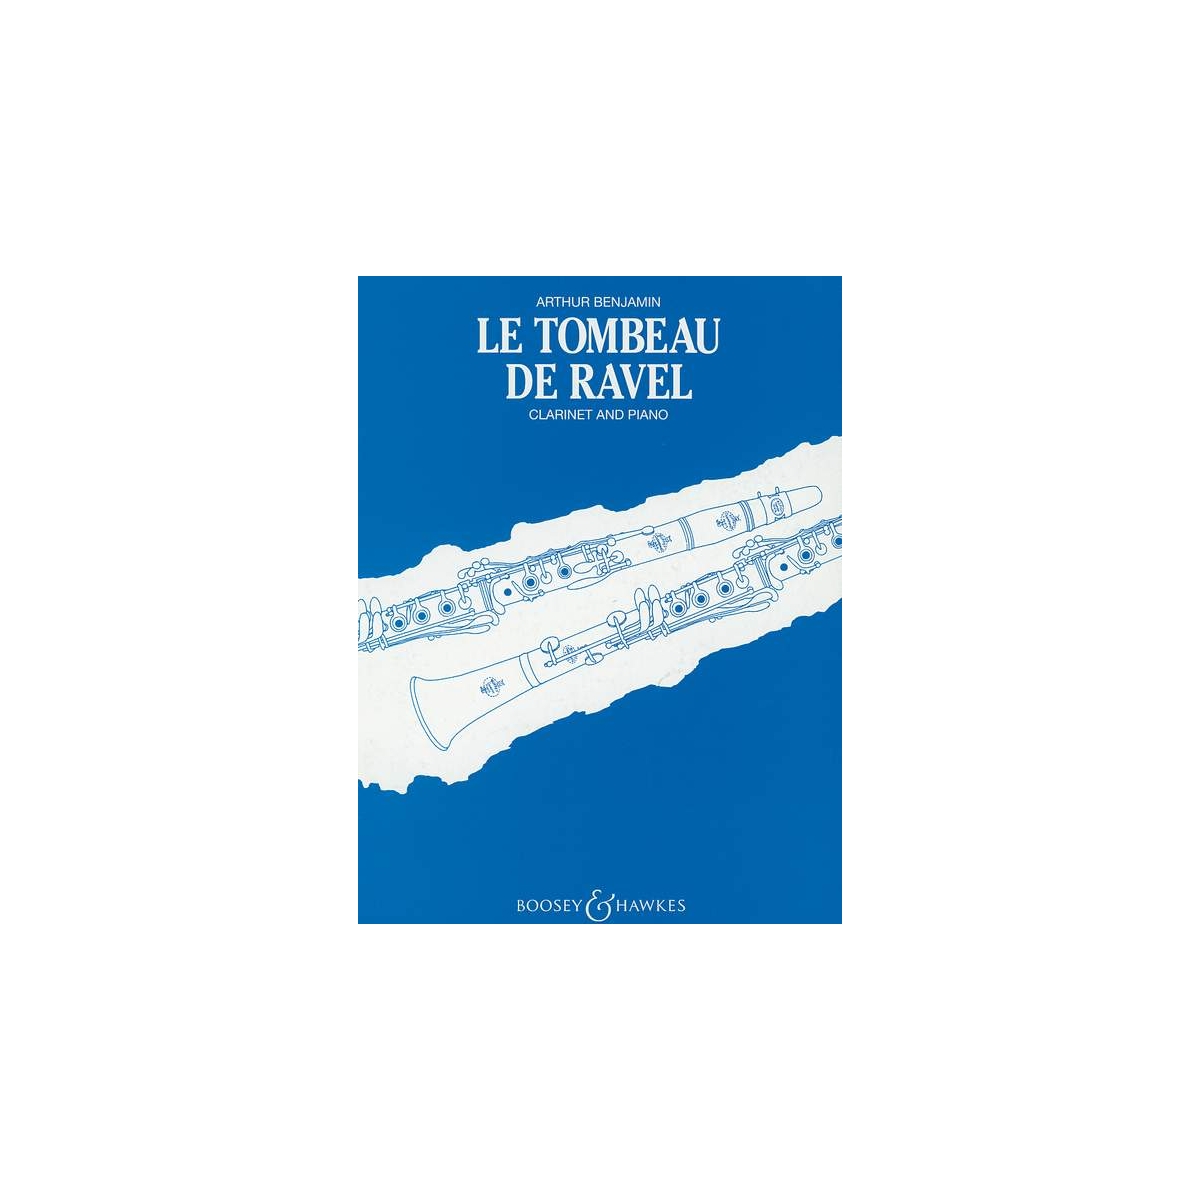 Le Tombeau de Ravel for Clarinet and Piano